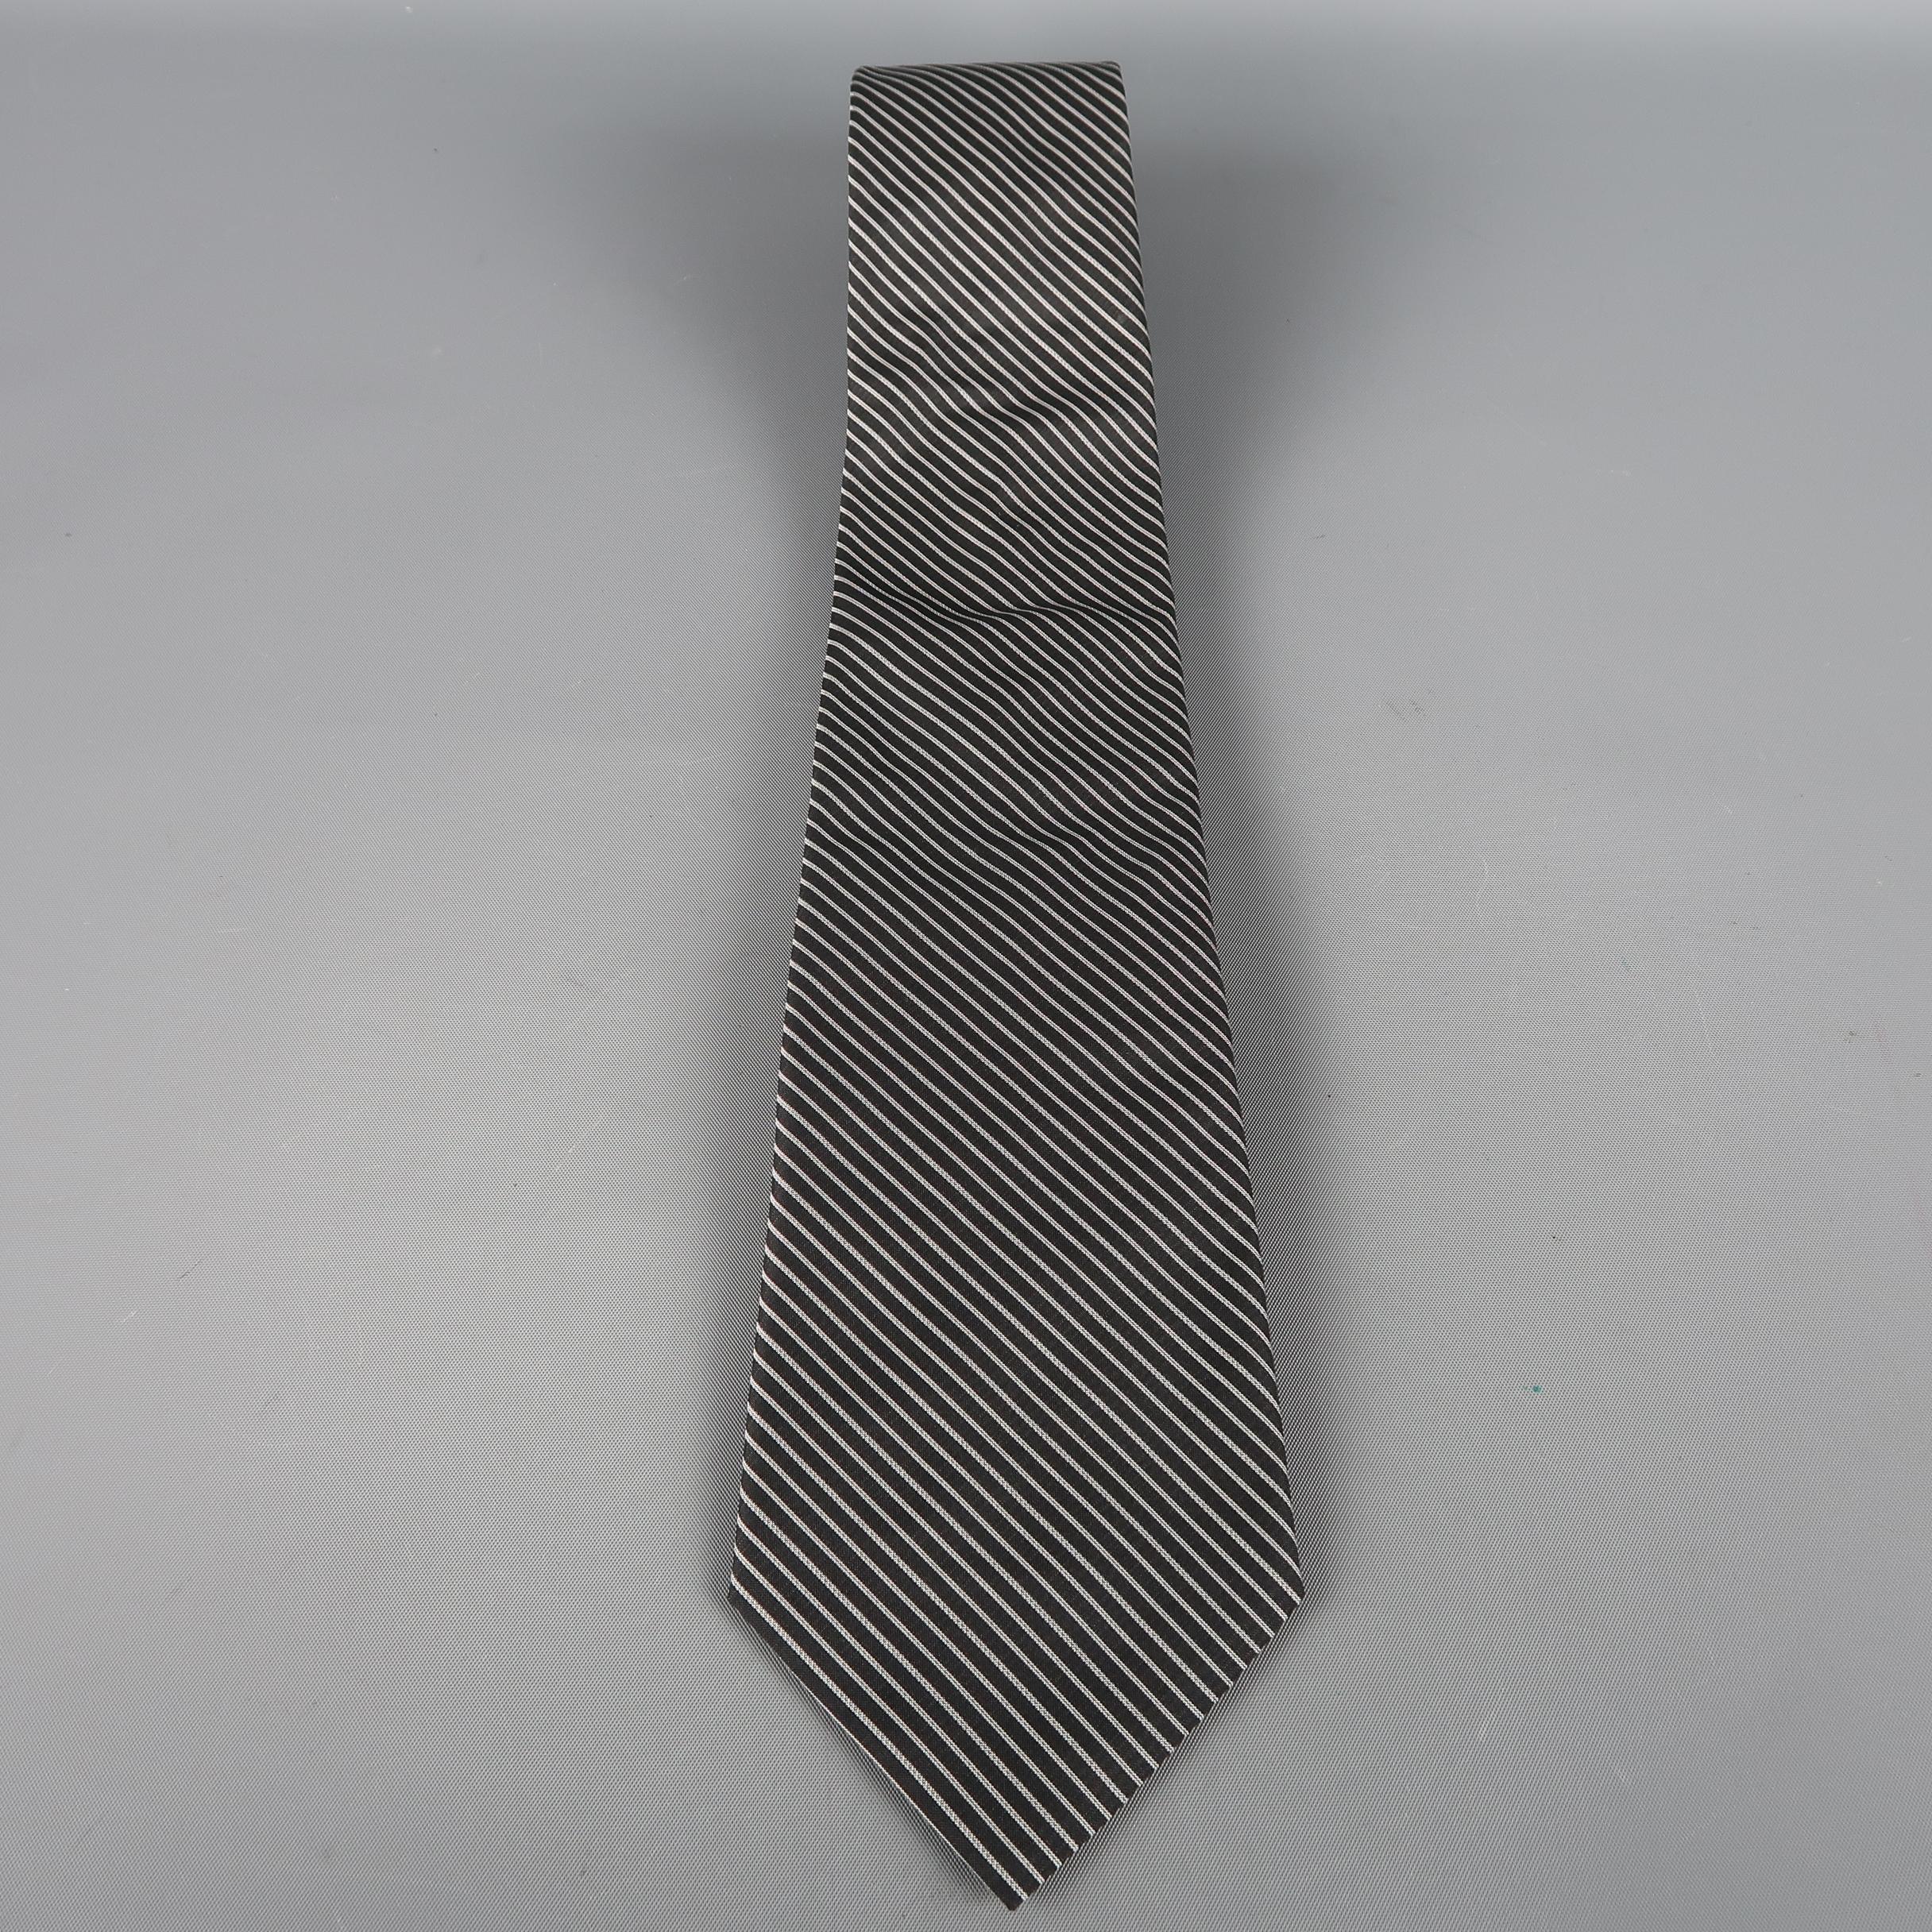 DIOR HOMME tie come in black and silver diagonal stripes in silk material. Made in Italy.
 
Excellent Pre-Owned Condition.
 
Width: 3.5 in.